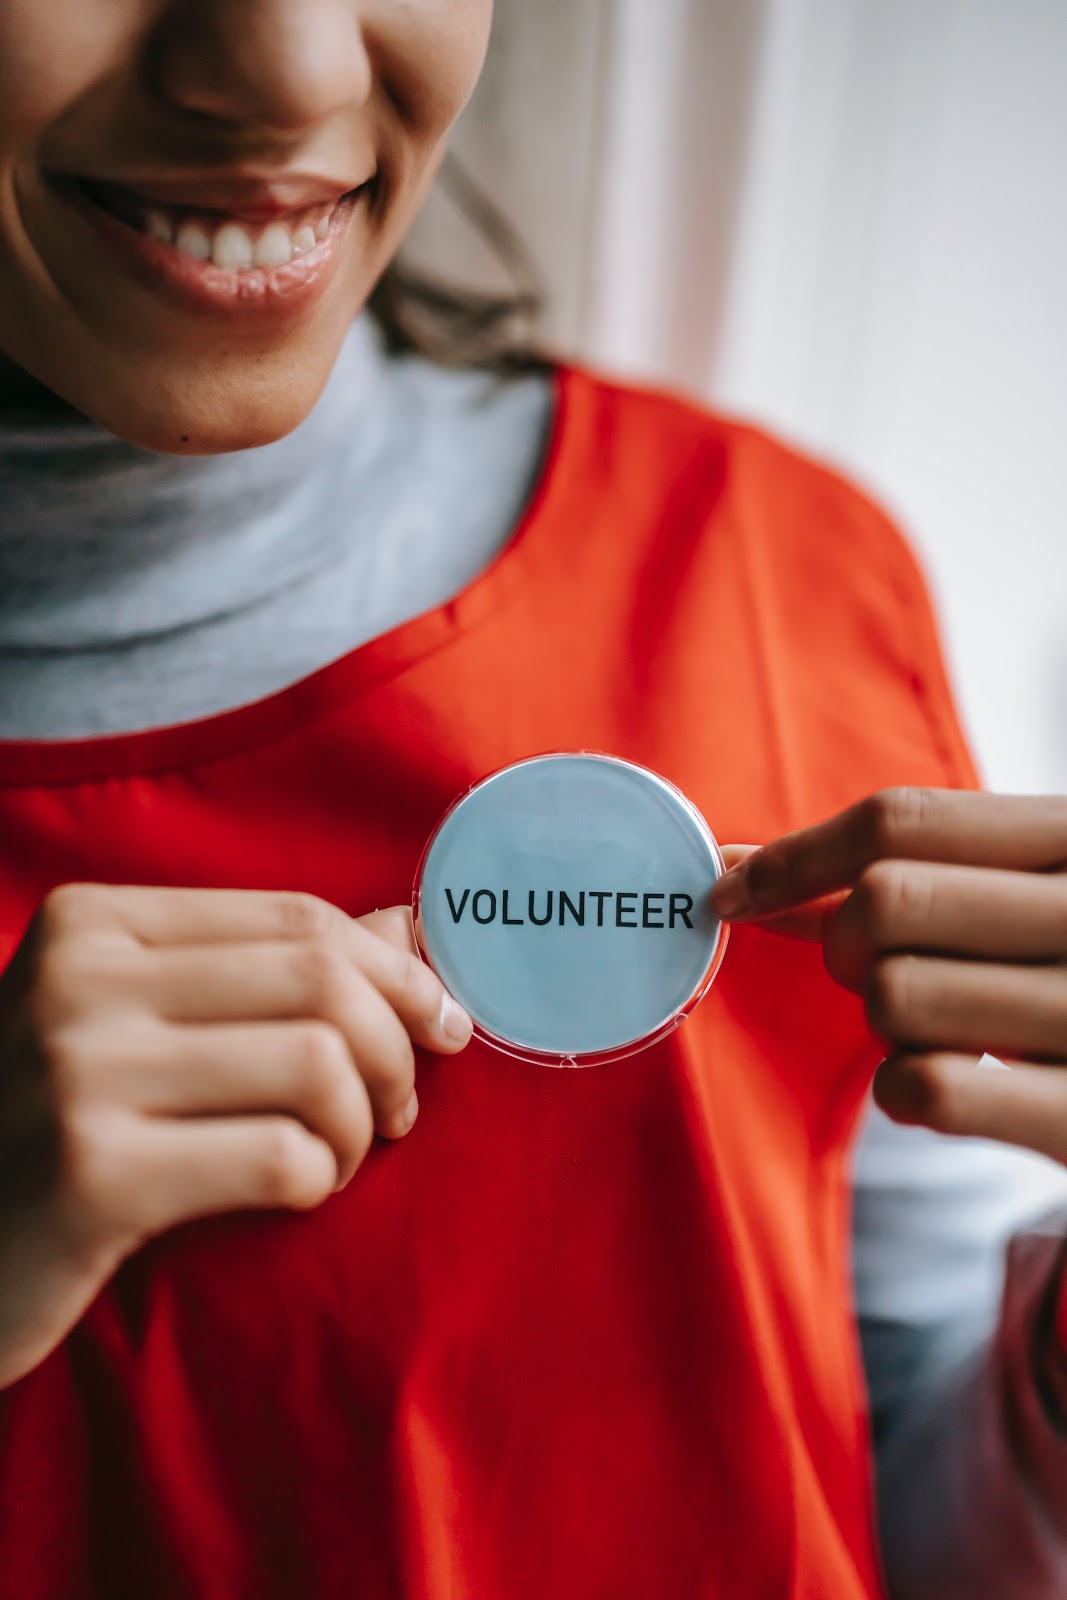 A girl in red clothes with a "volunteer" badge